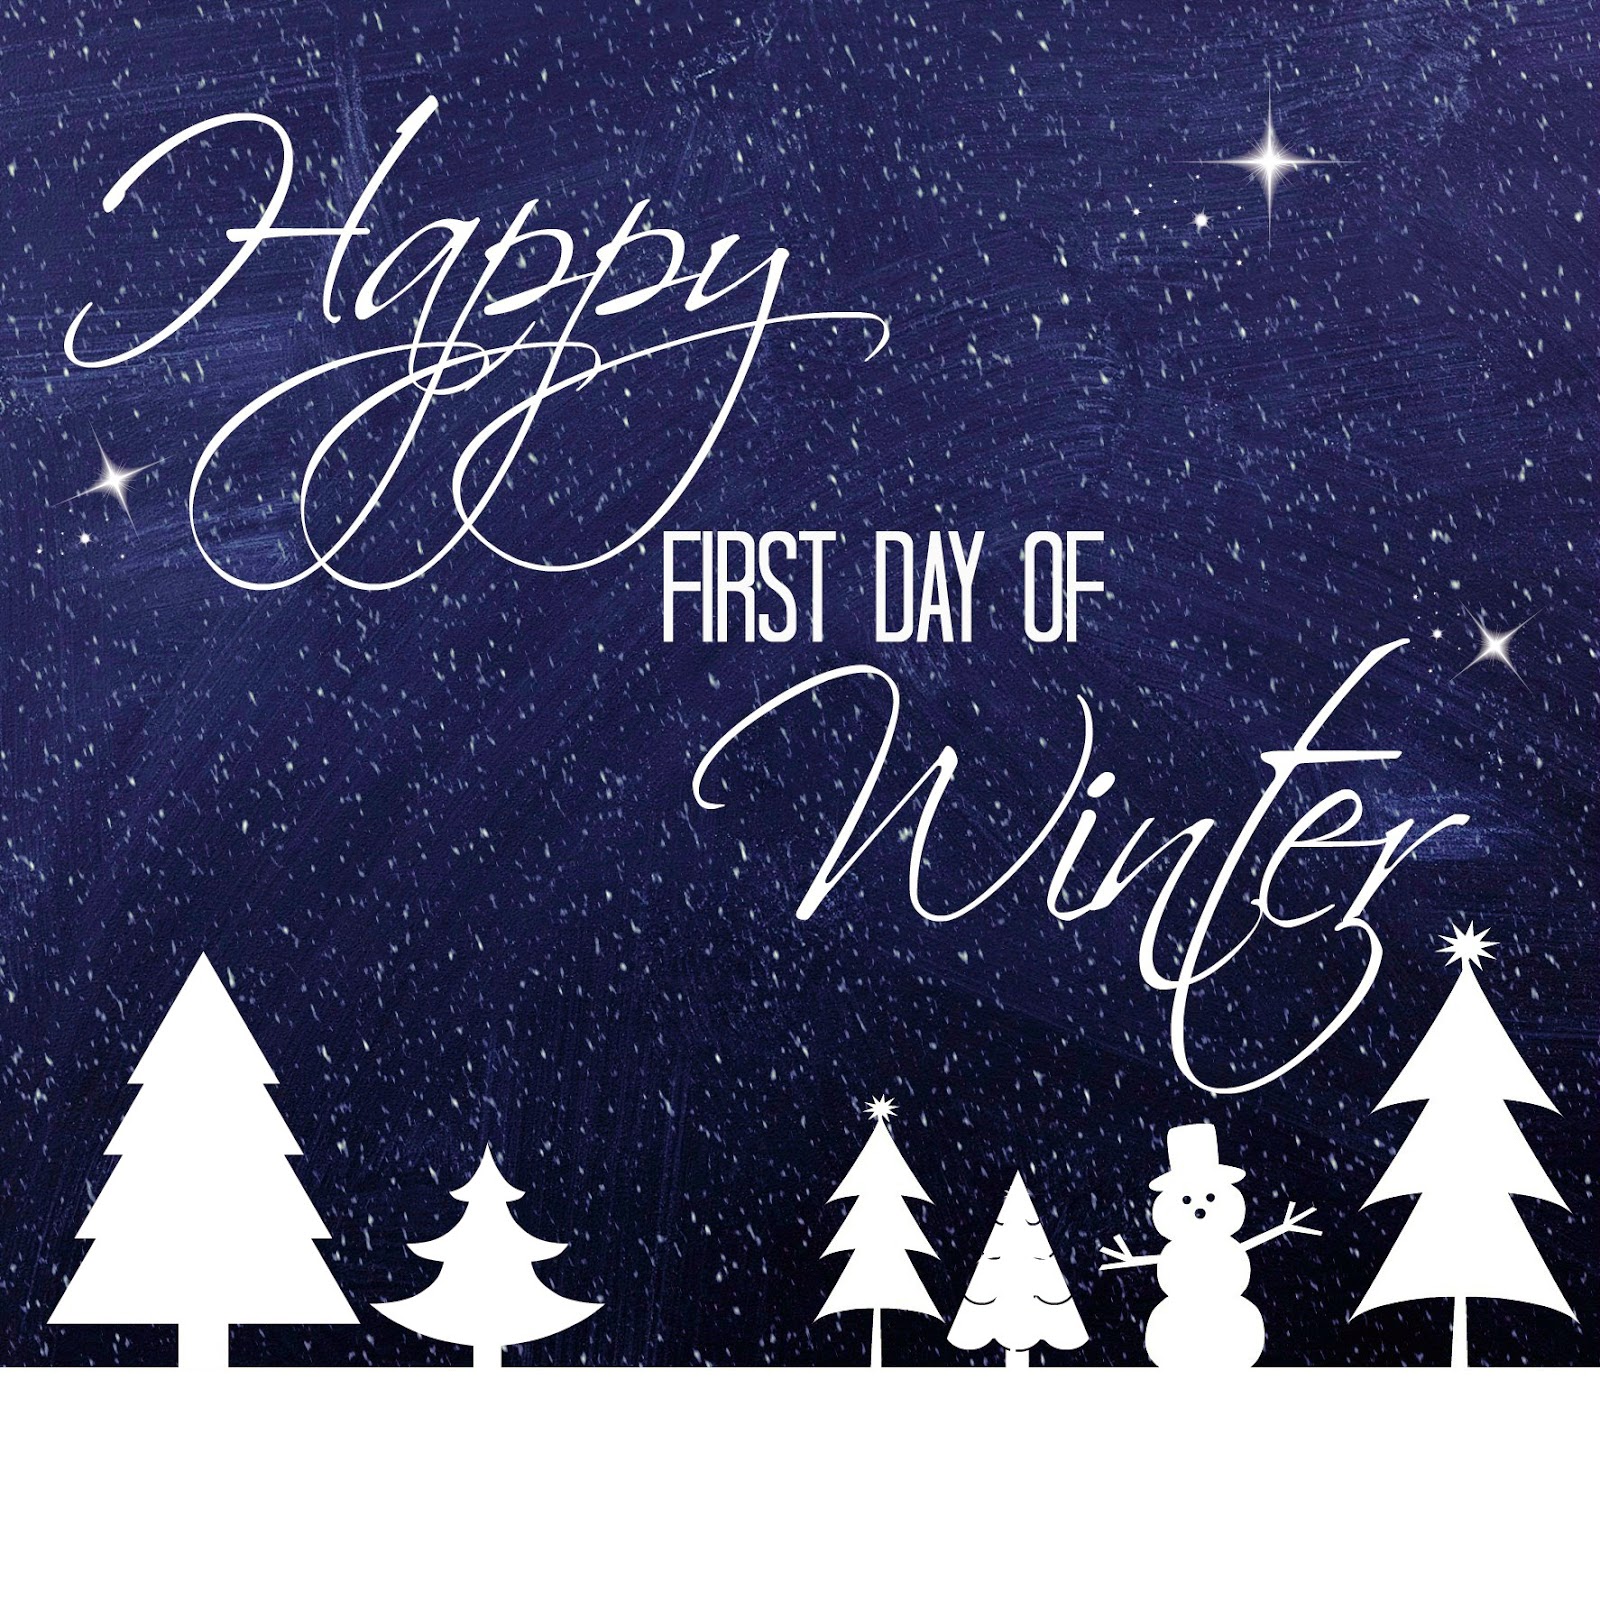 December first. Happy first Day of Winter. Happy Winter Day. 1st Winter Day. First Day of Winter картинки.